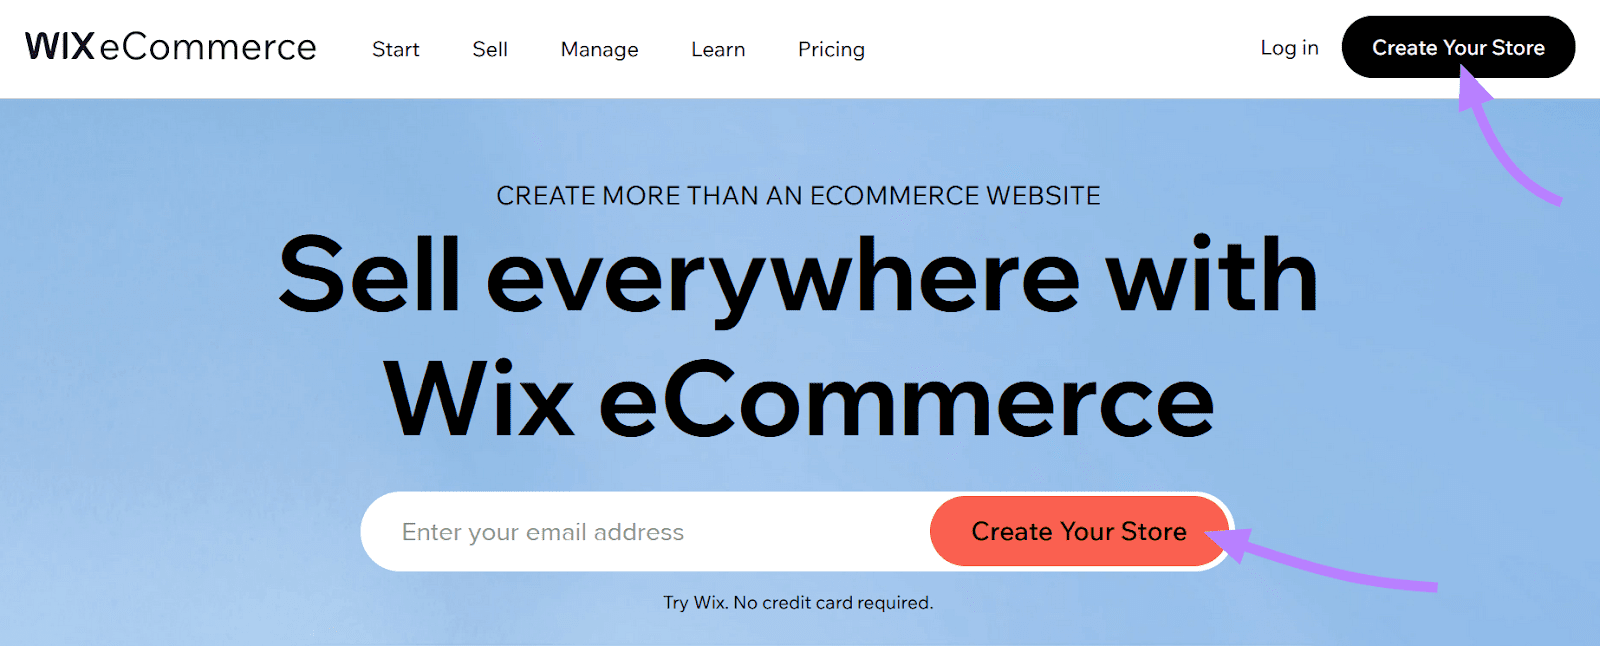 "Create Your Store" CTA highlighted on Wix